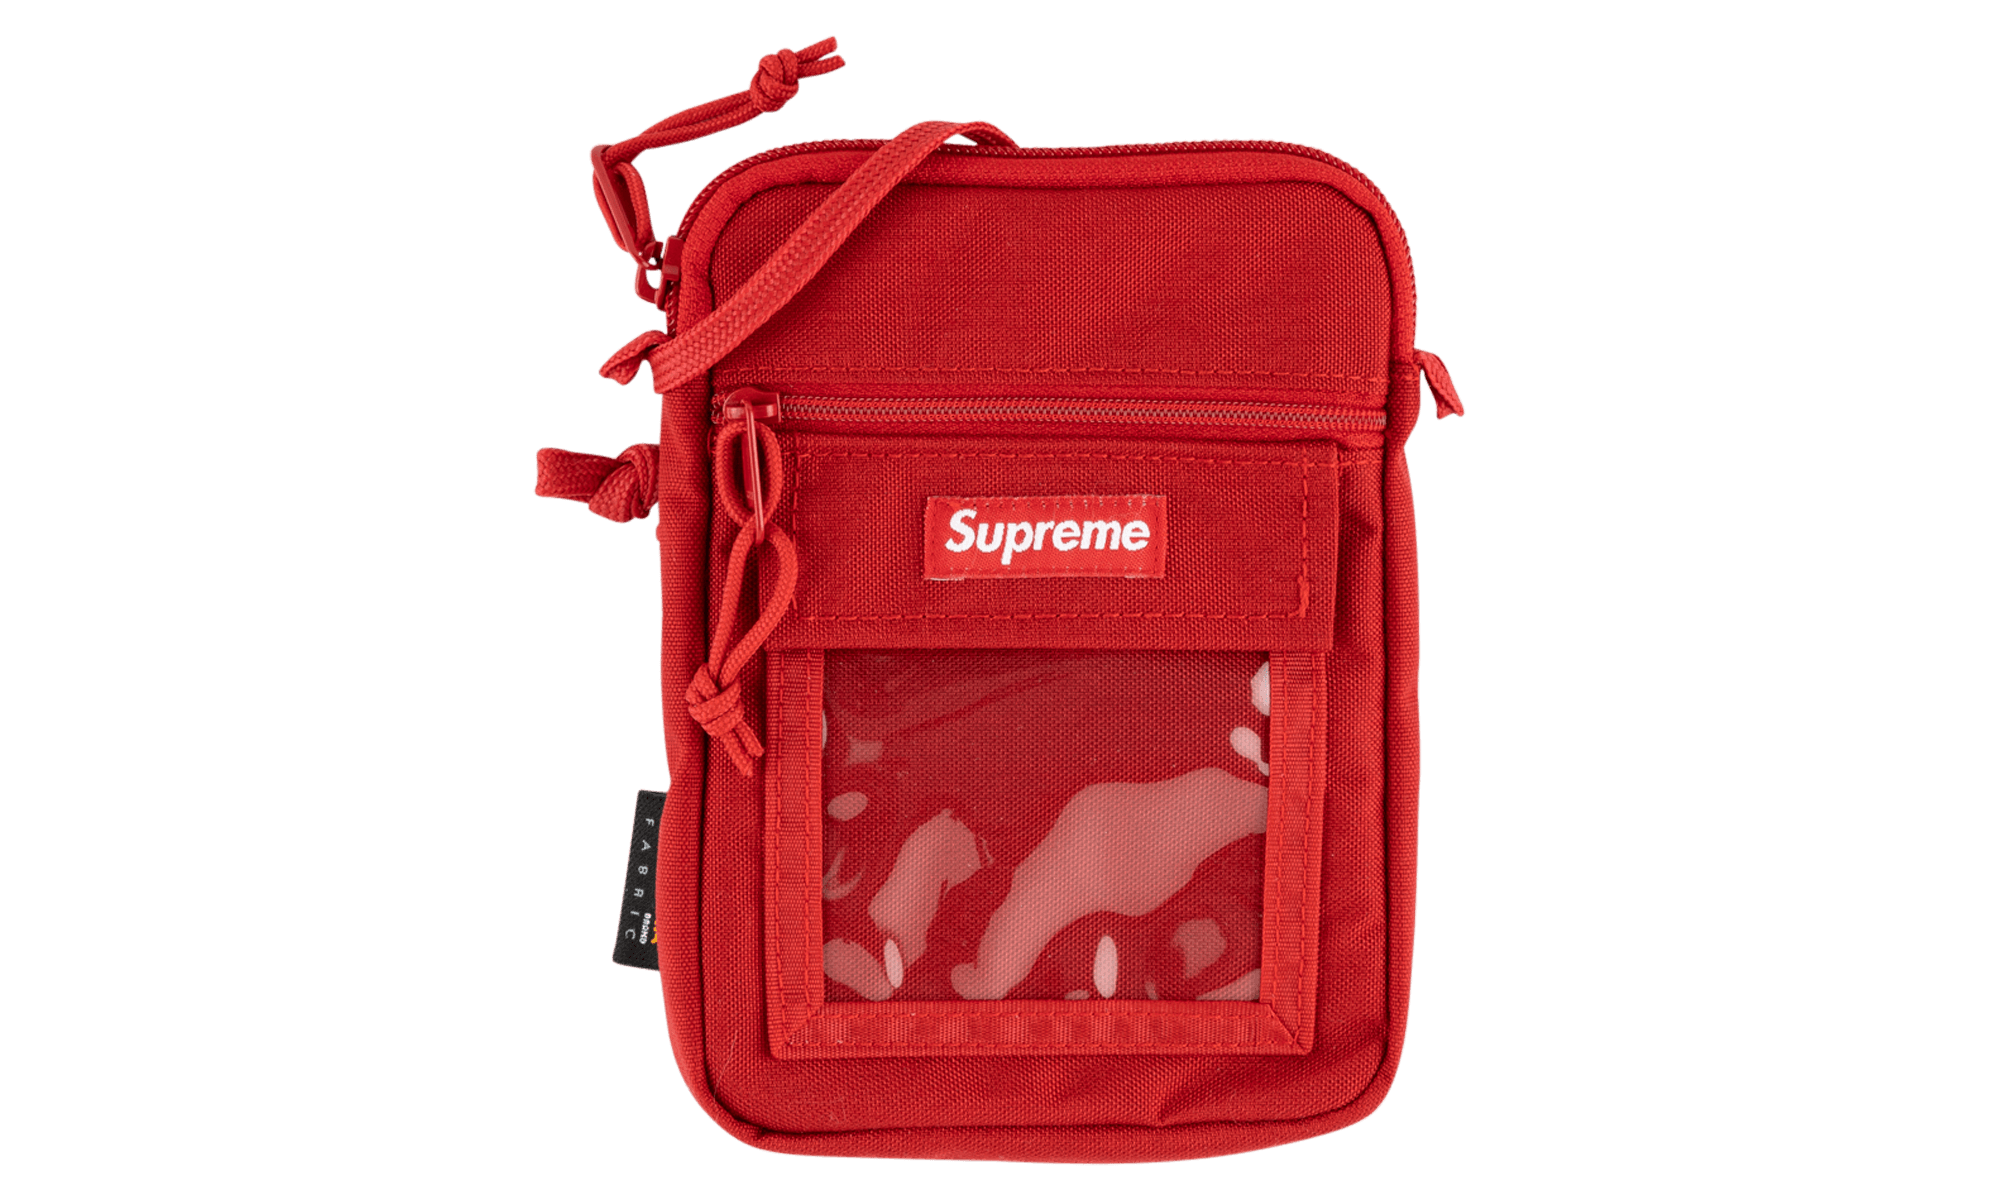 supreme Utility Pouch red